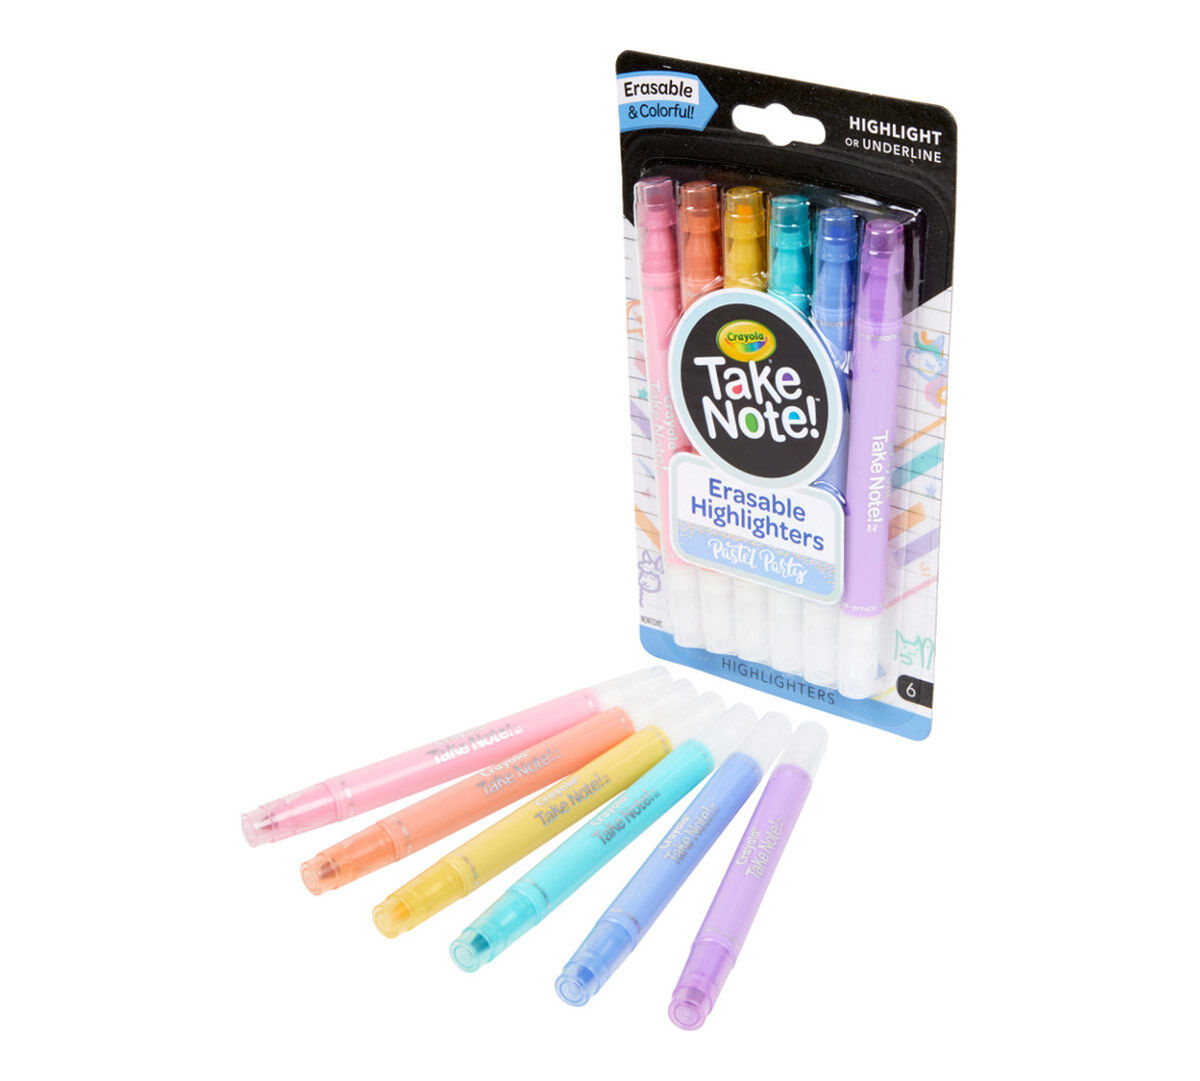 Crayola Take Note Erasable Highlighters School Art Supplies 6 Colors NEW! 